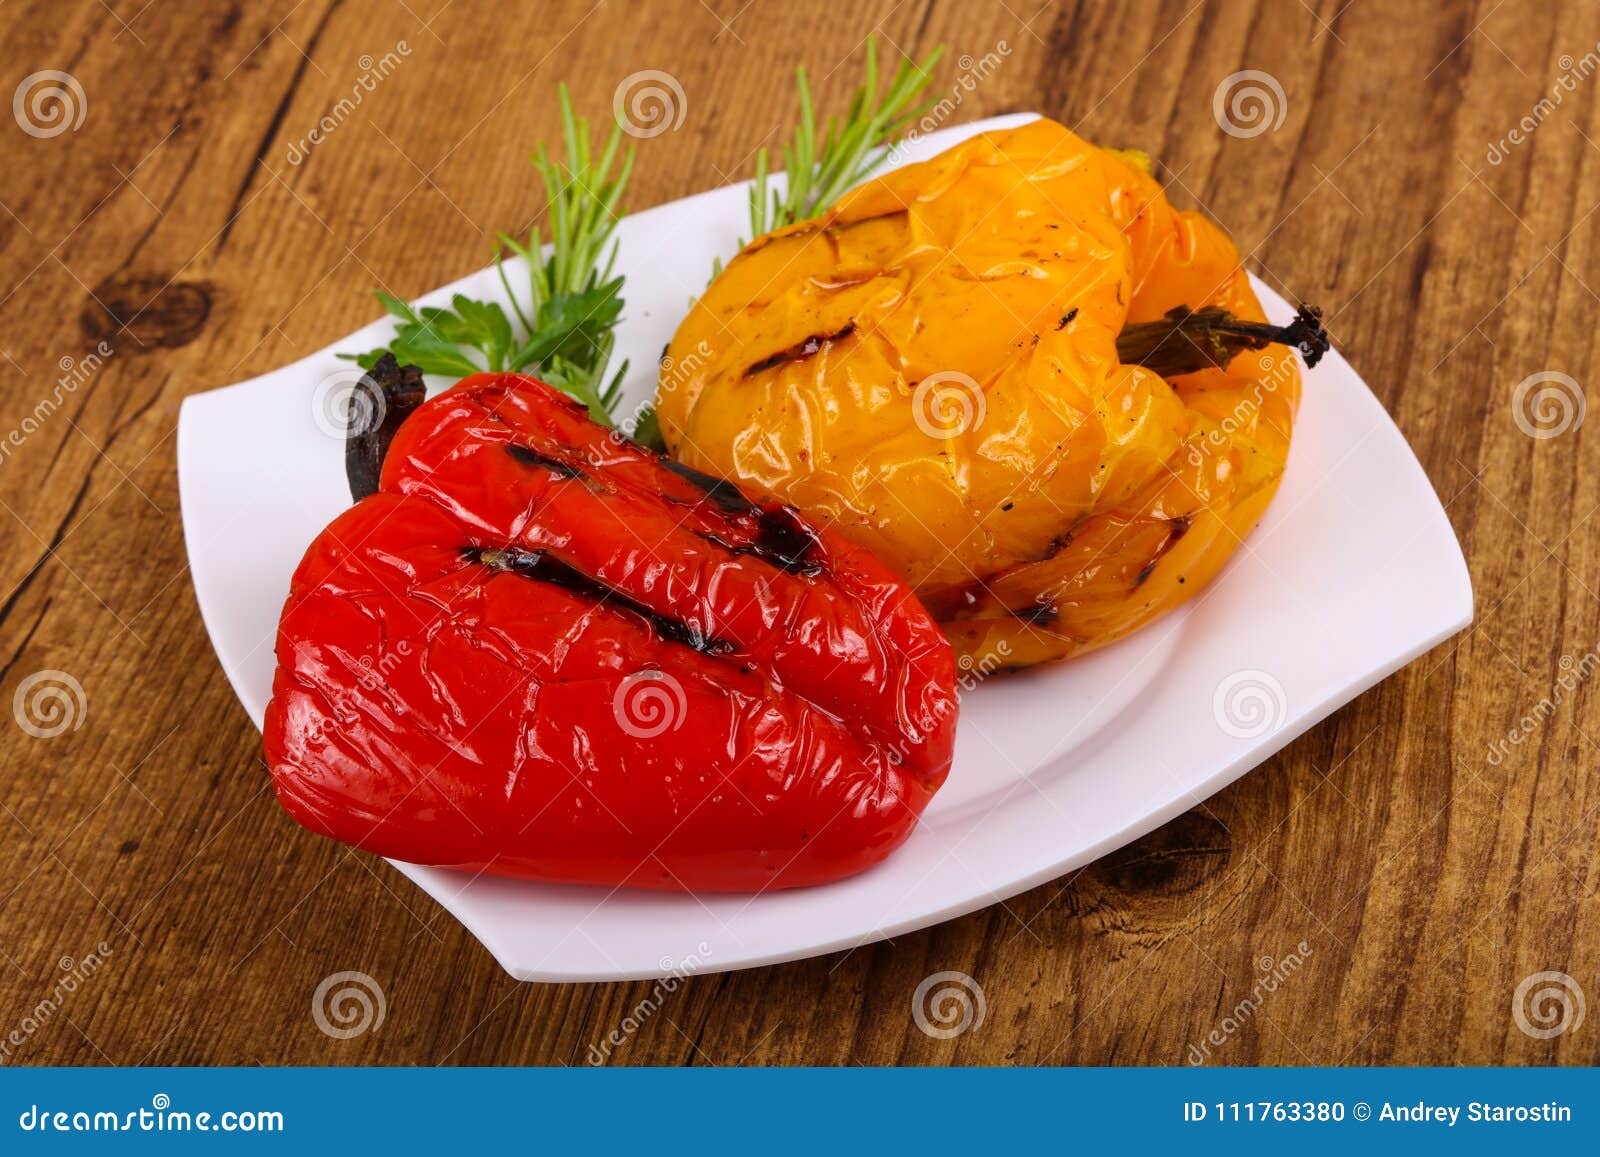 Grilled Bell Peppers stock photo. Image of orange, paprika - 111763380